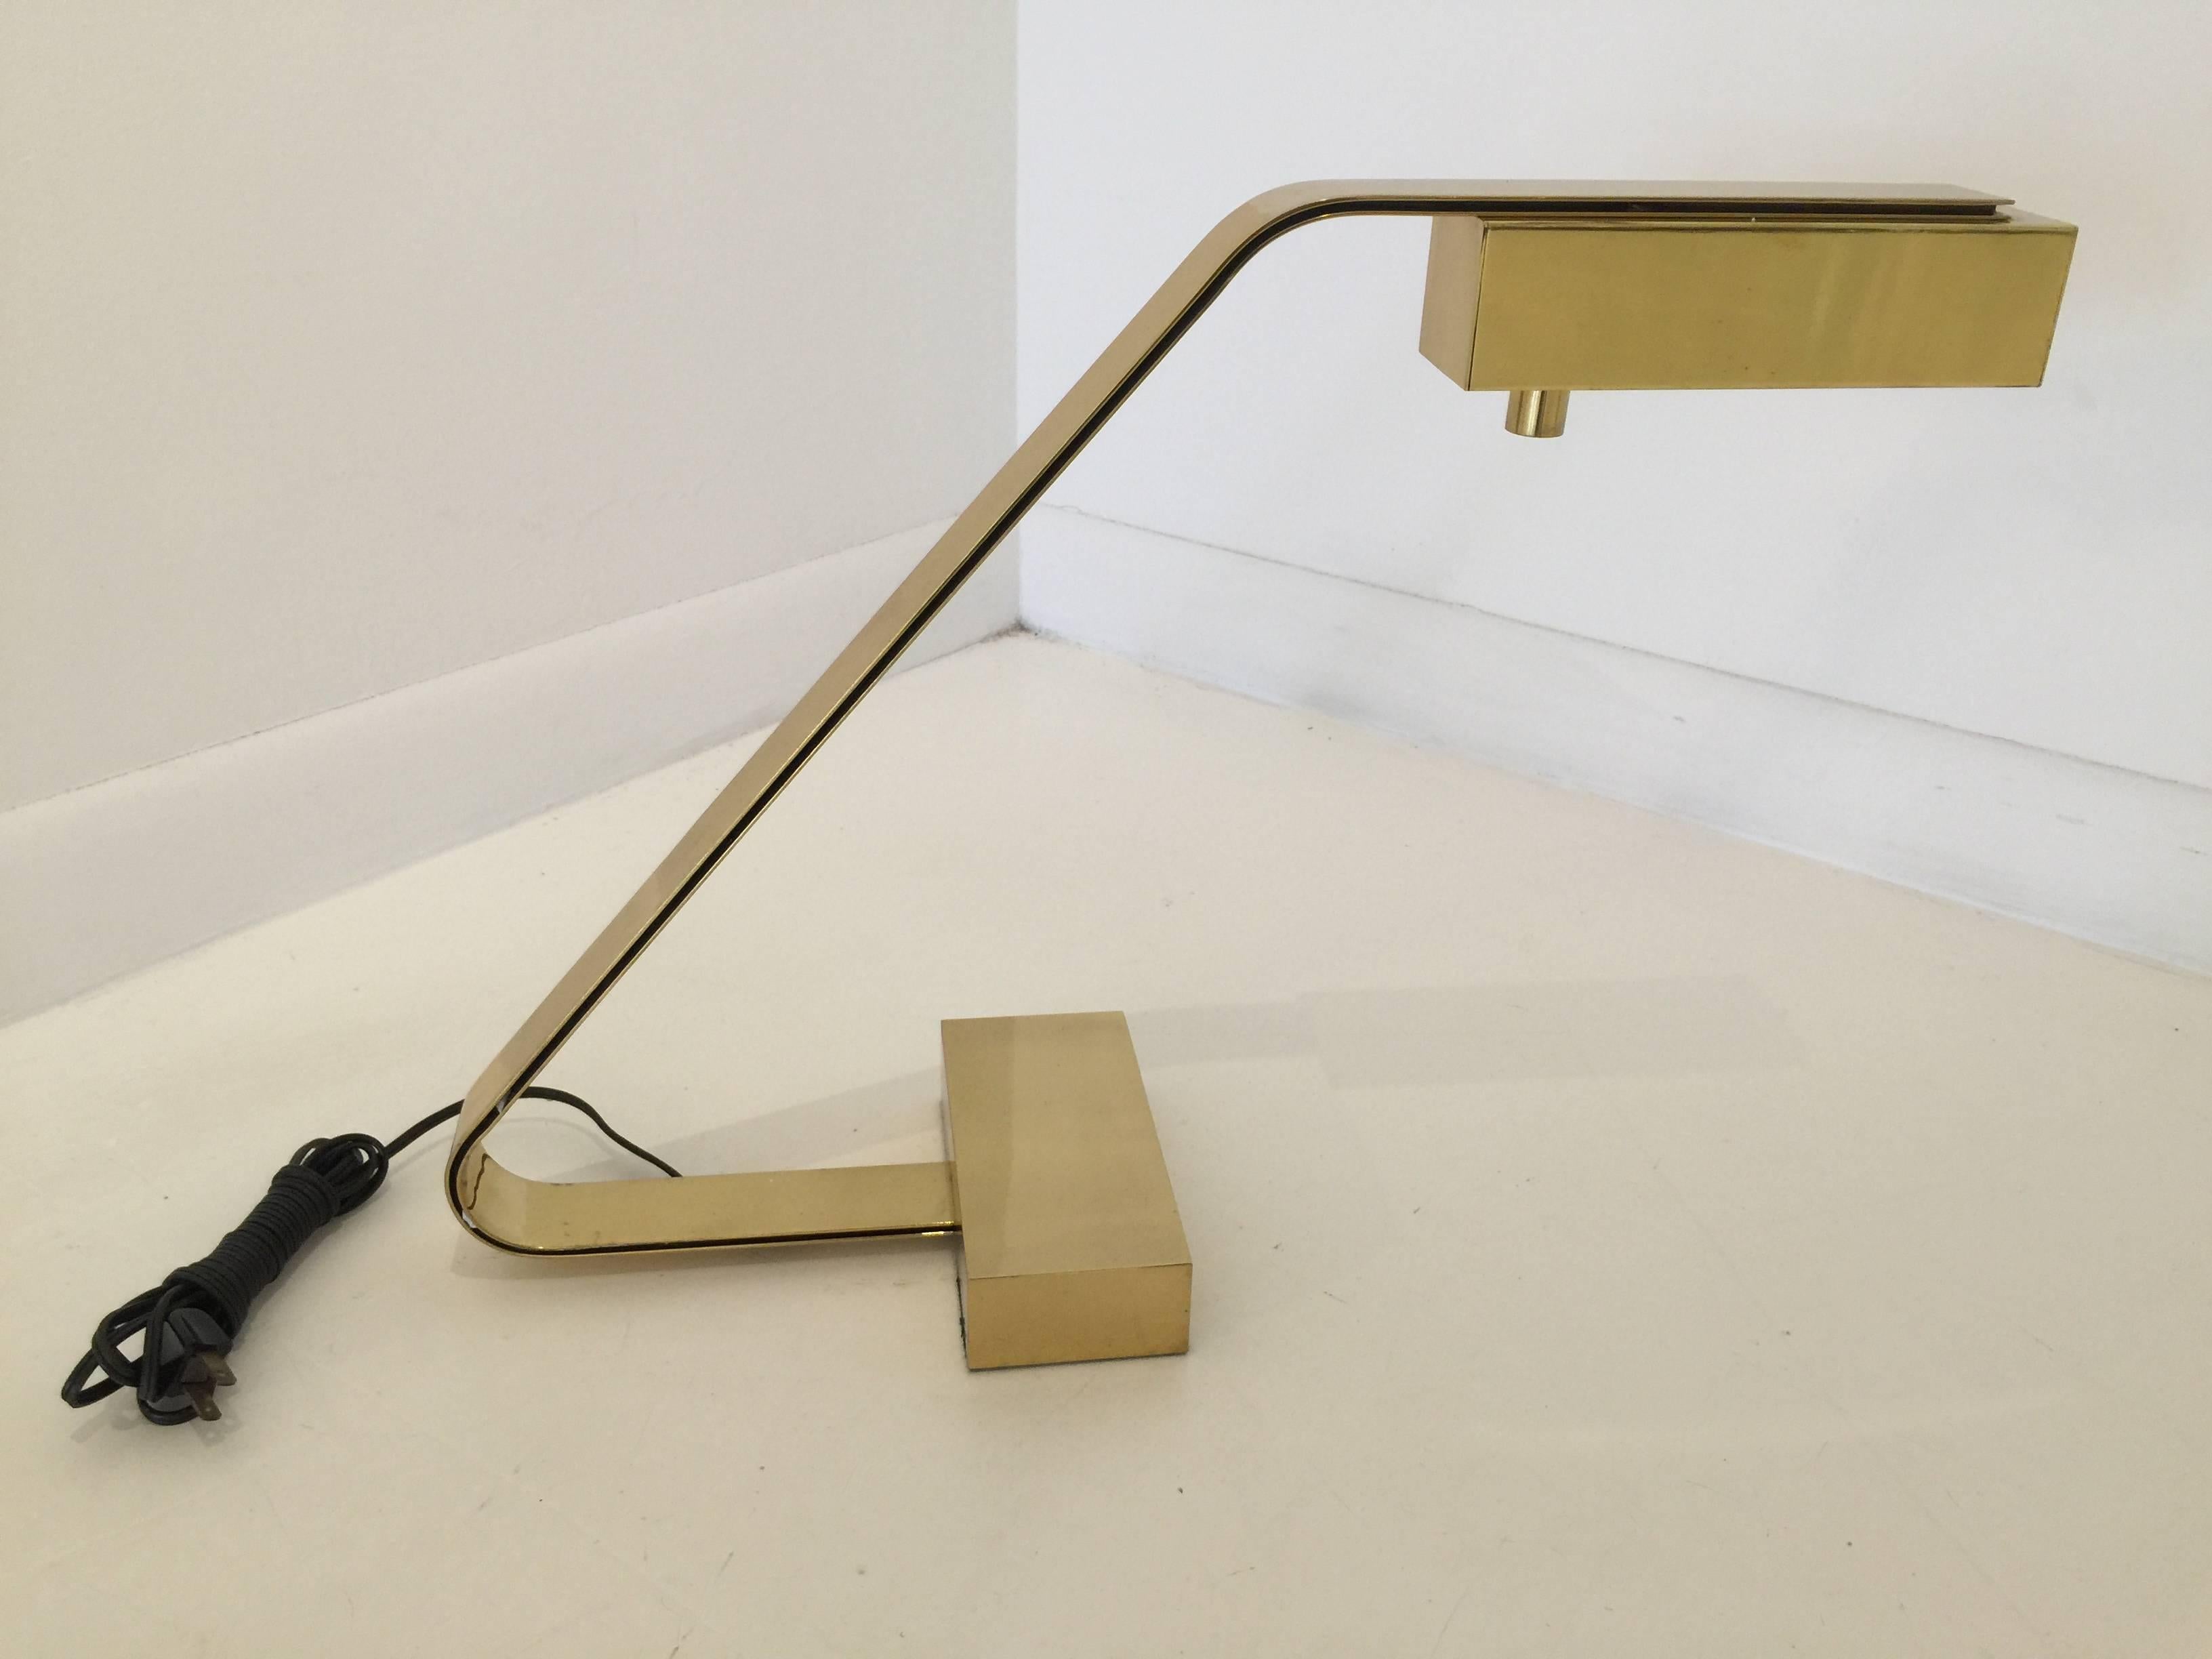 All brass, this cantilevered heavy brass desk lamp by Casella, is a lovely modern touch to any decor.